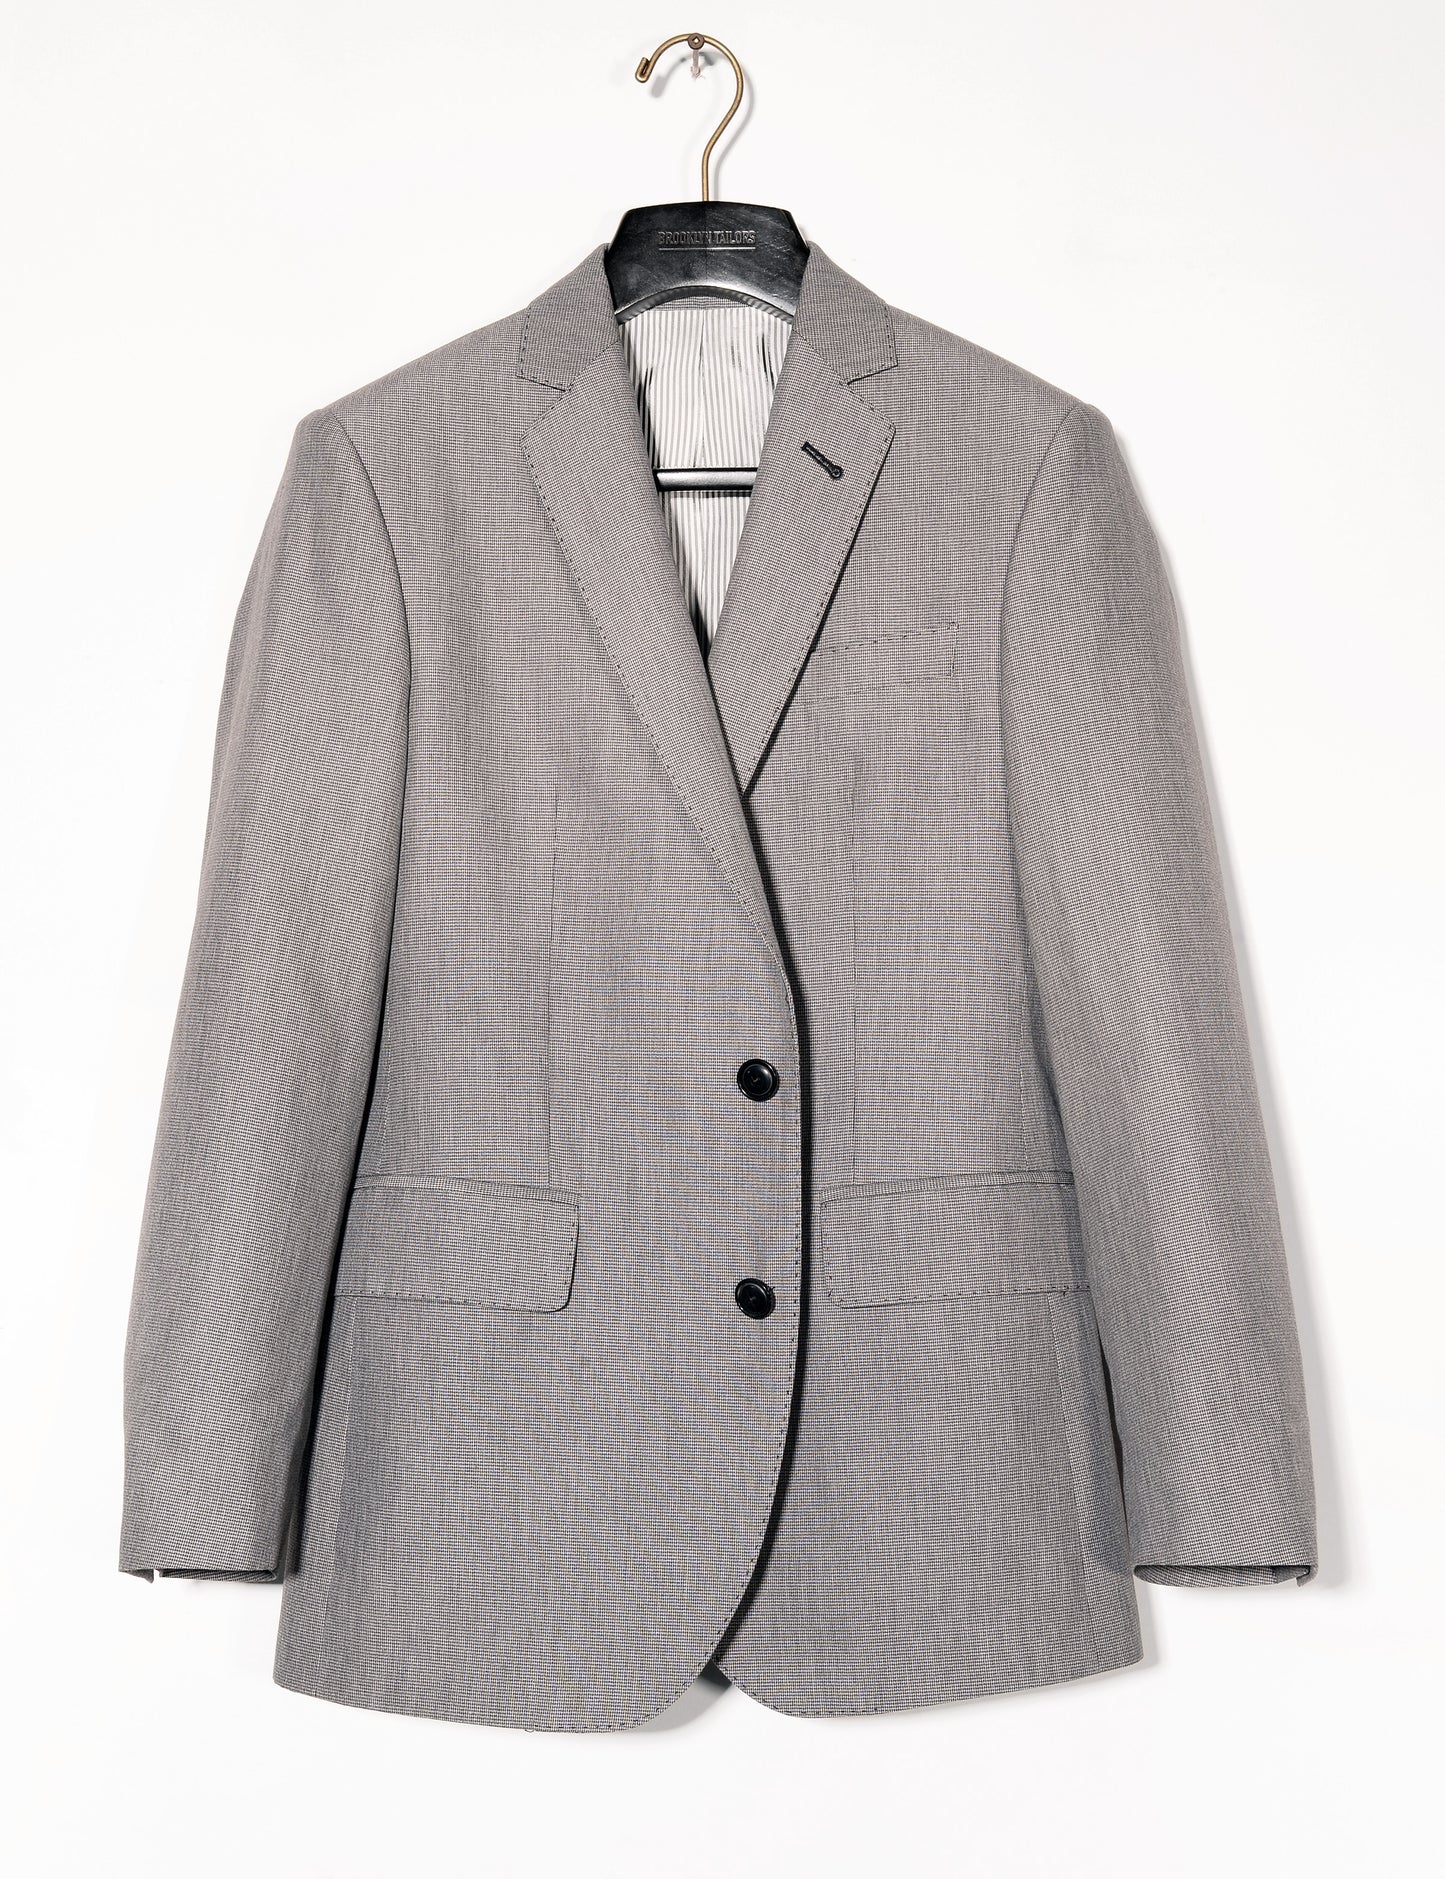 FINAL SALE: BKT50 Tailored Jacket in Cotton Micro Weave - Graphite